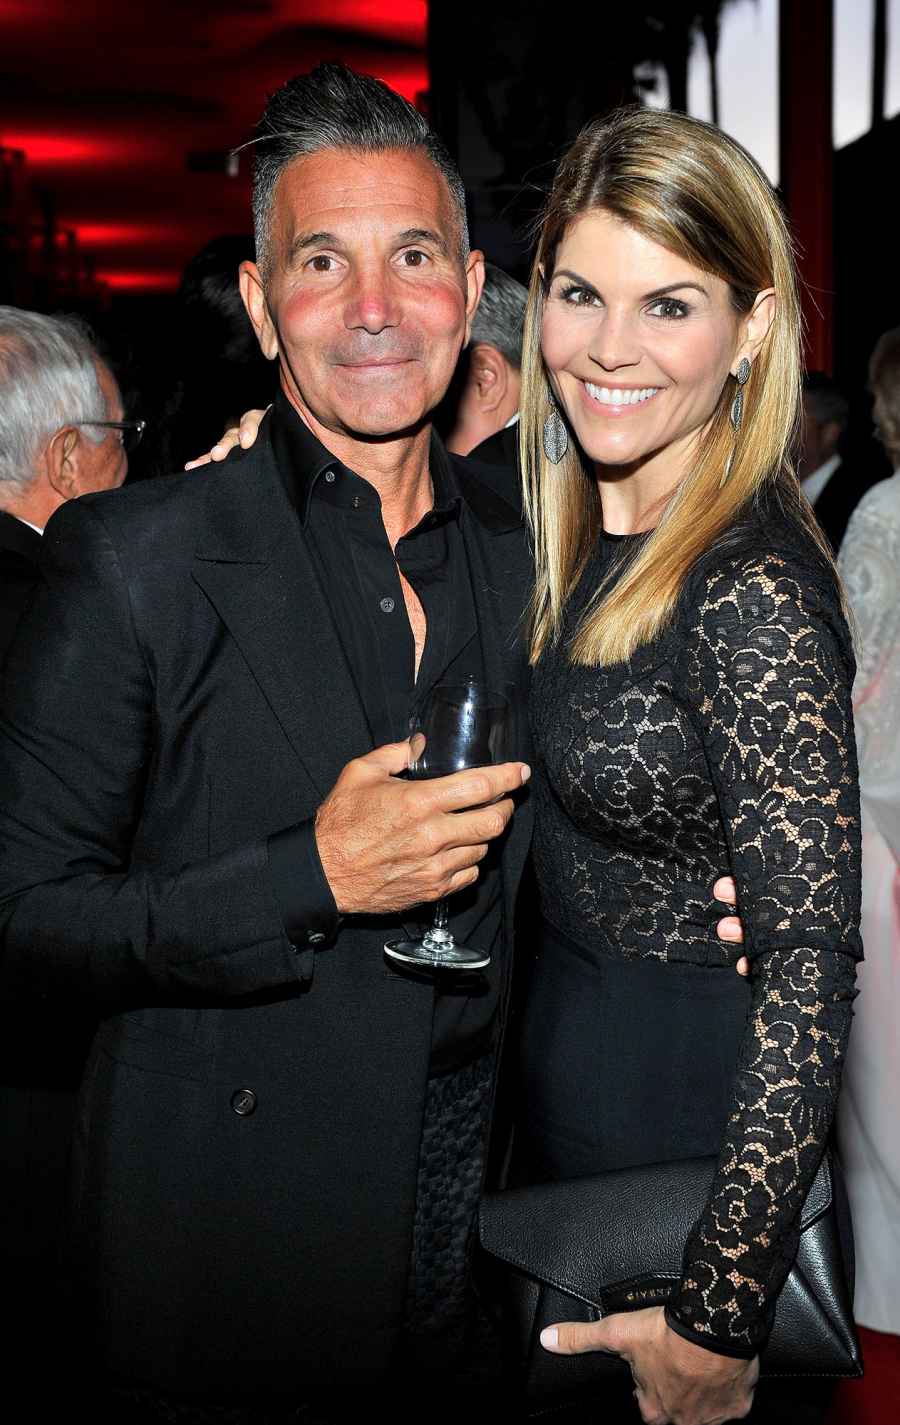 Lori Loughlin and Mossimo Giannulli Plead Not Guilty